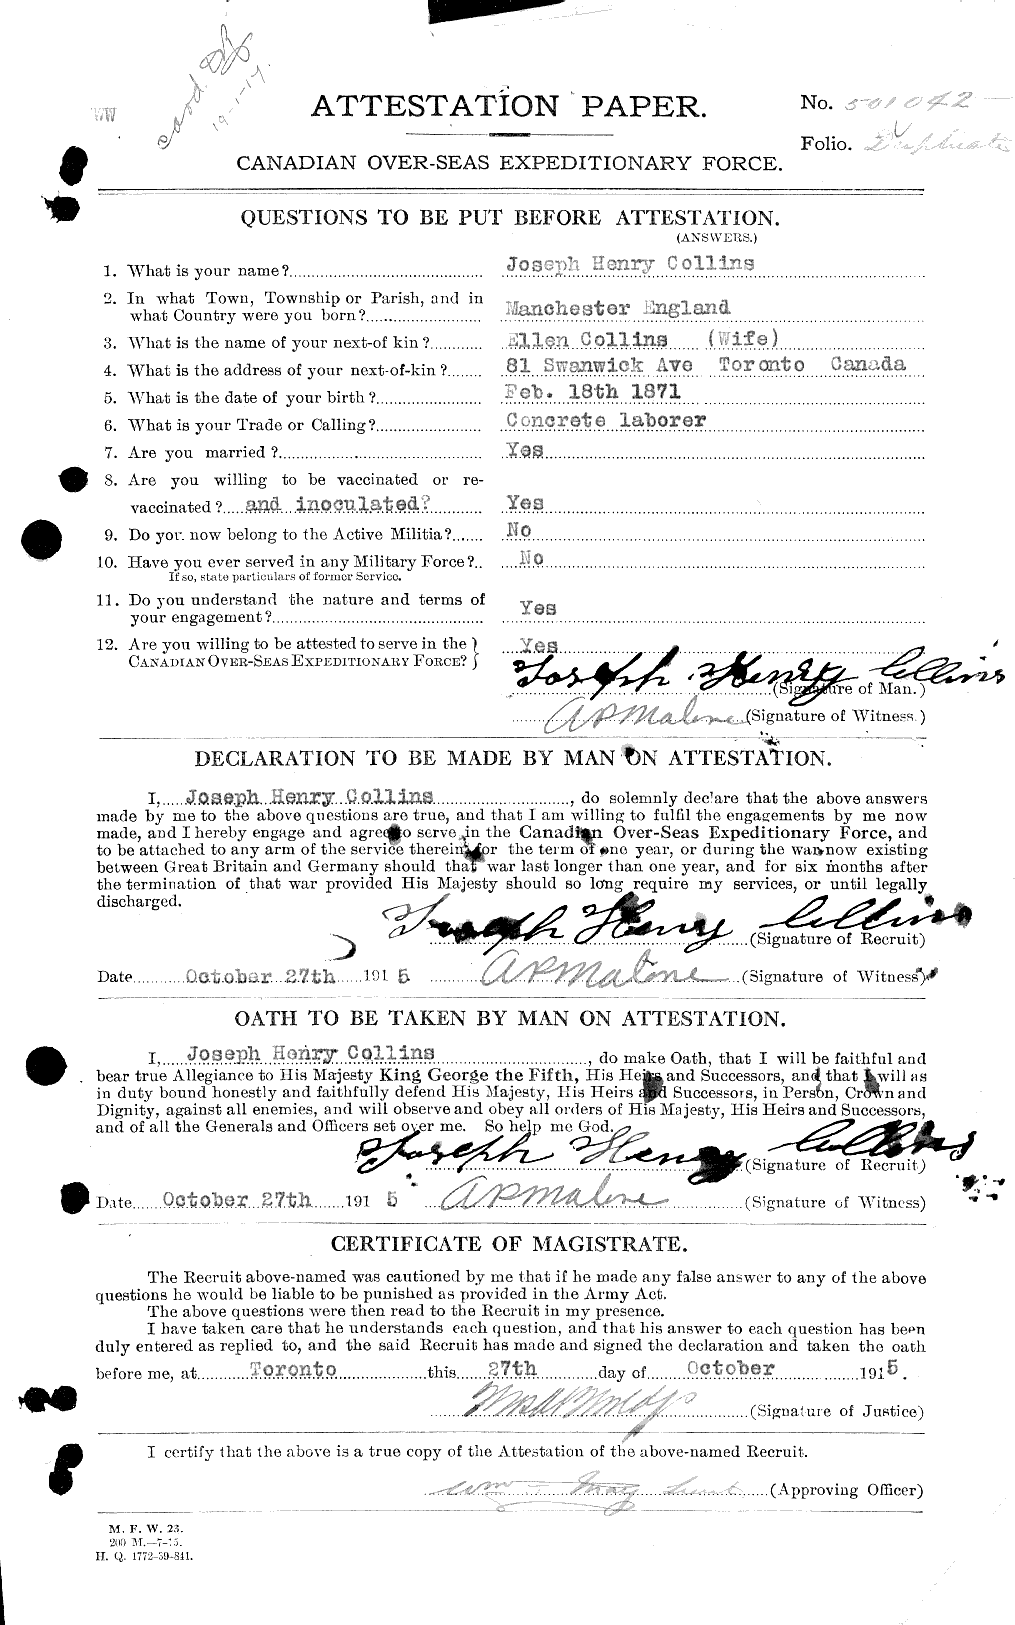 Personnel Records of the First World War - CEF 034422a